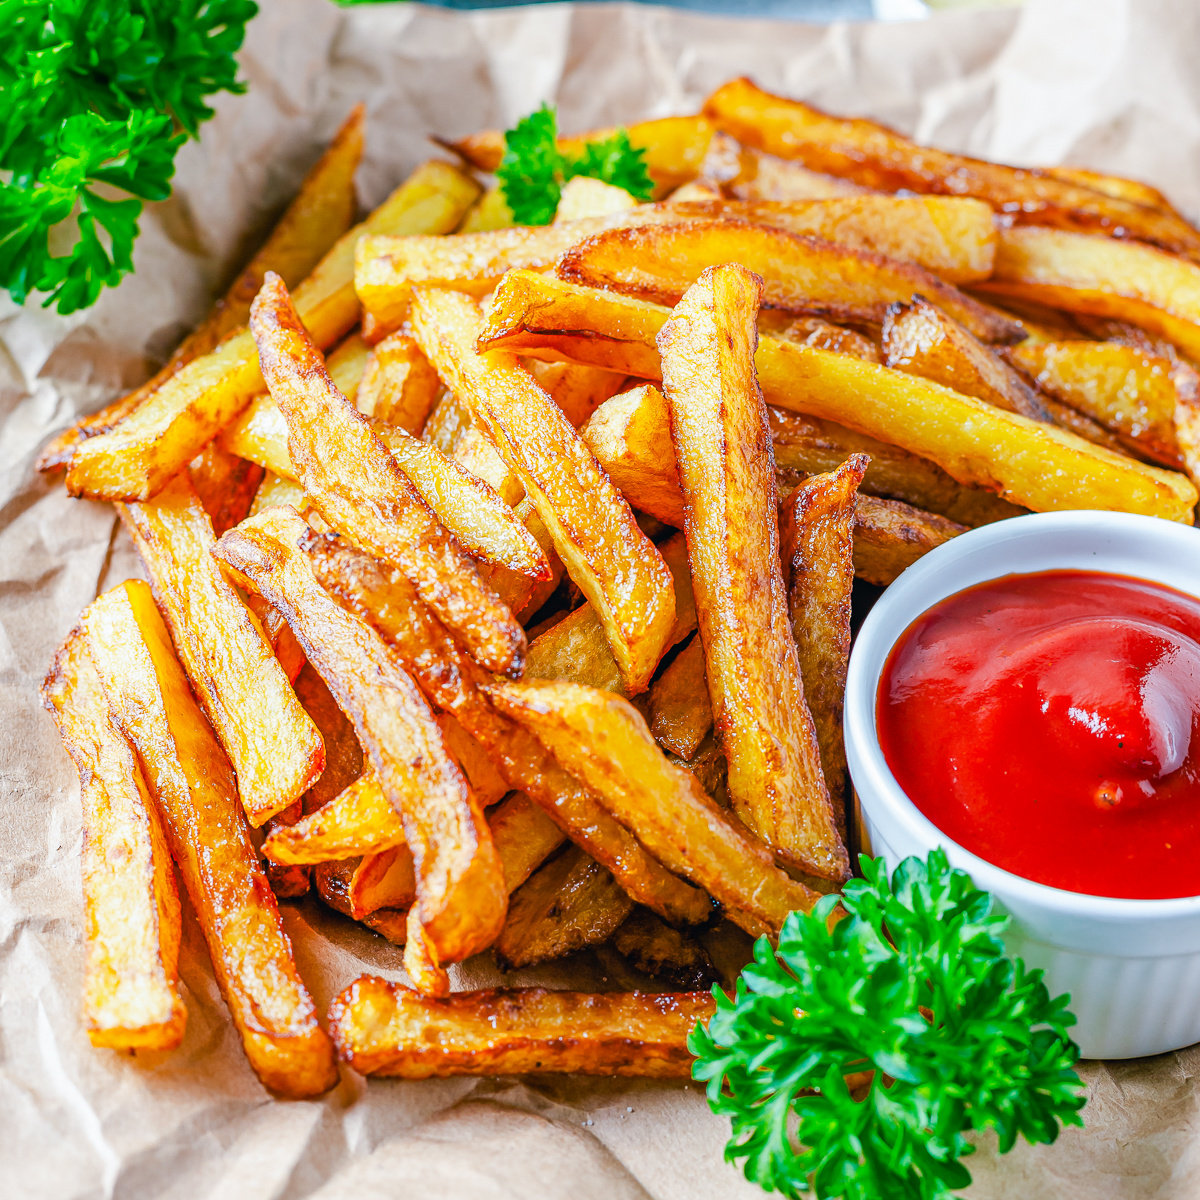 The Secret To Making The Best Fresh Cut Fries at Home